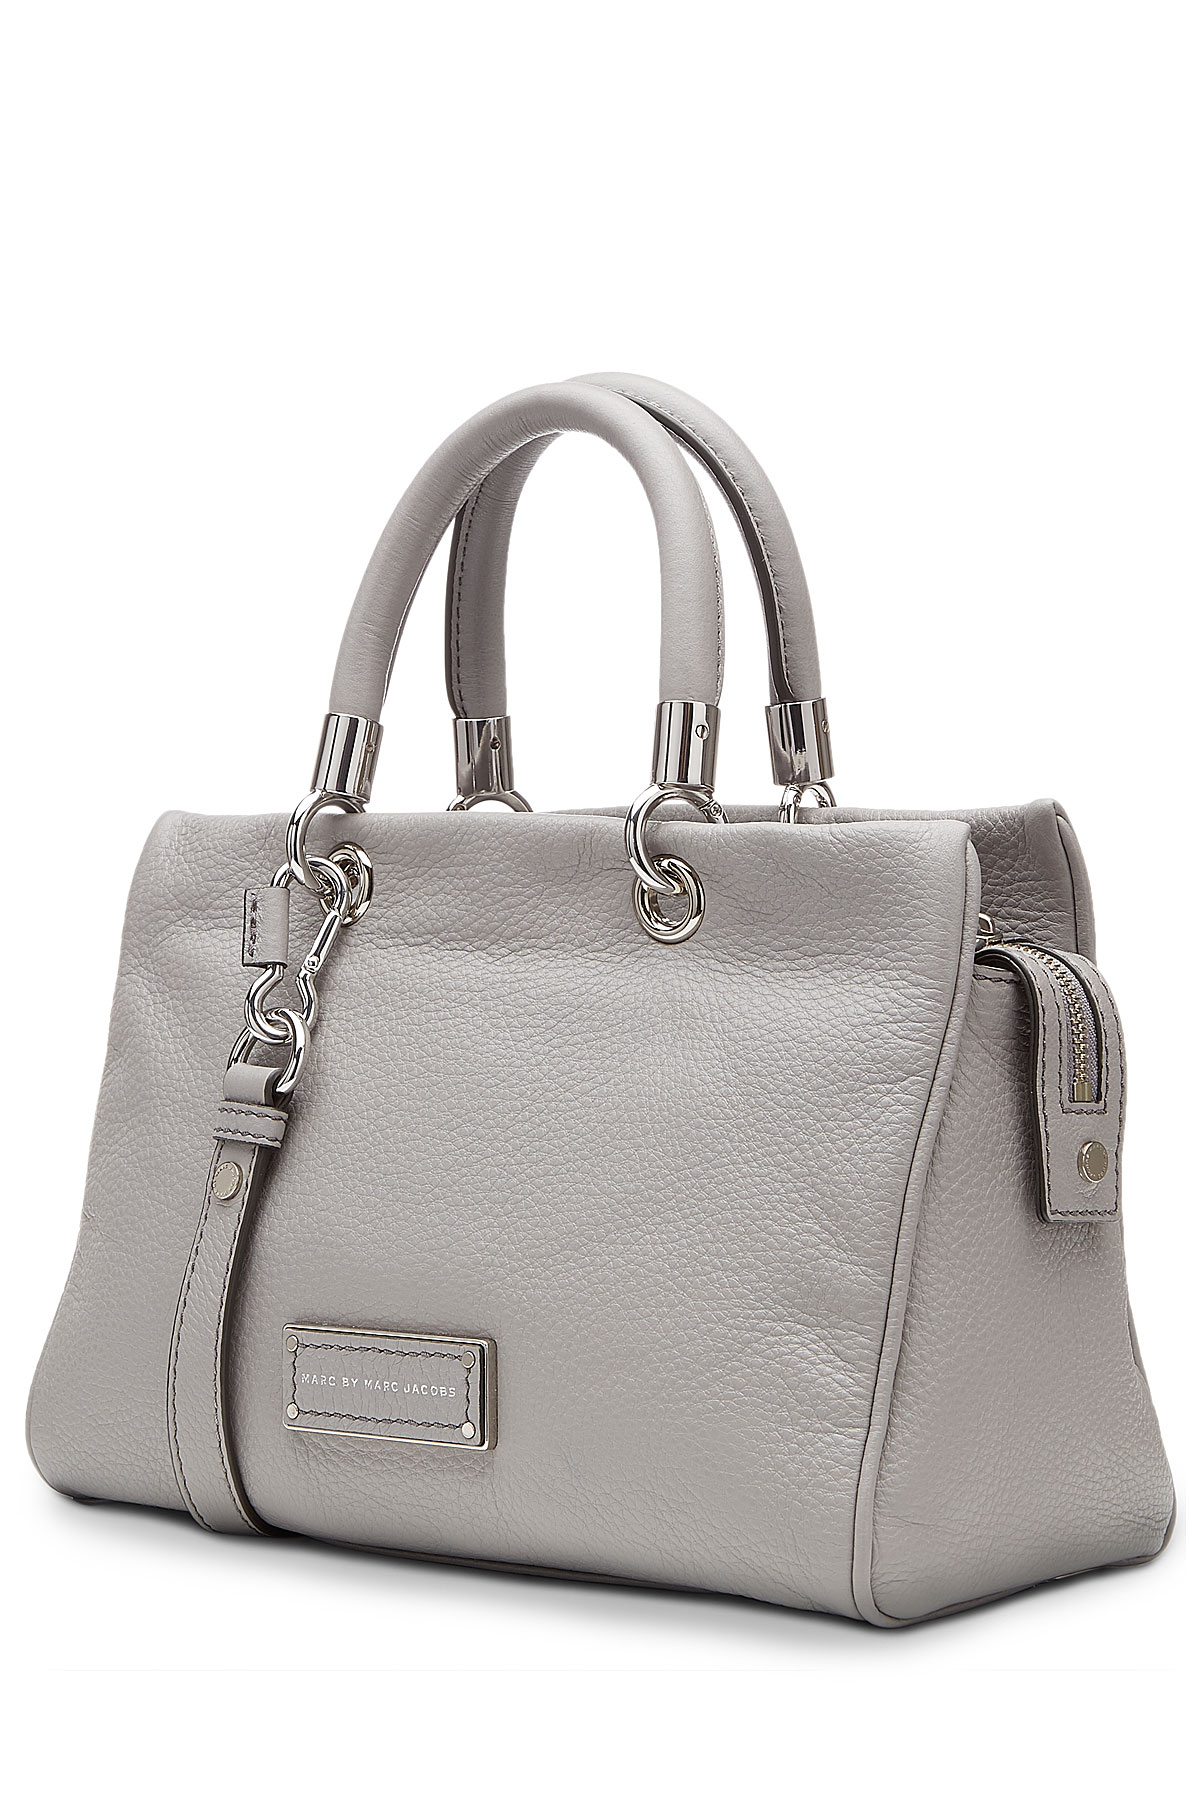 Lyst - Marc By Marc Jacobs Too Hot To Handle Small Leather Shoulder Bag - Grey in Gray